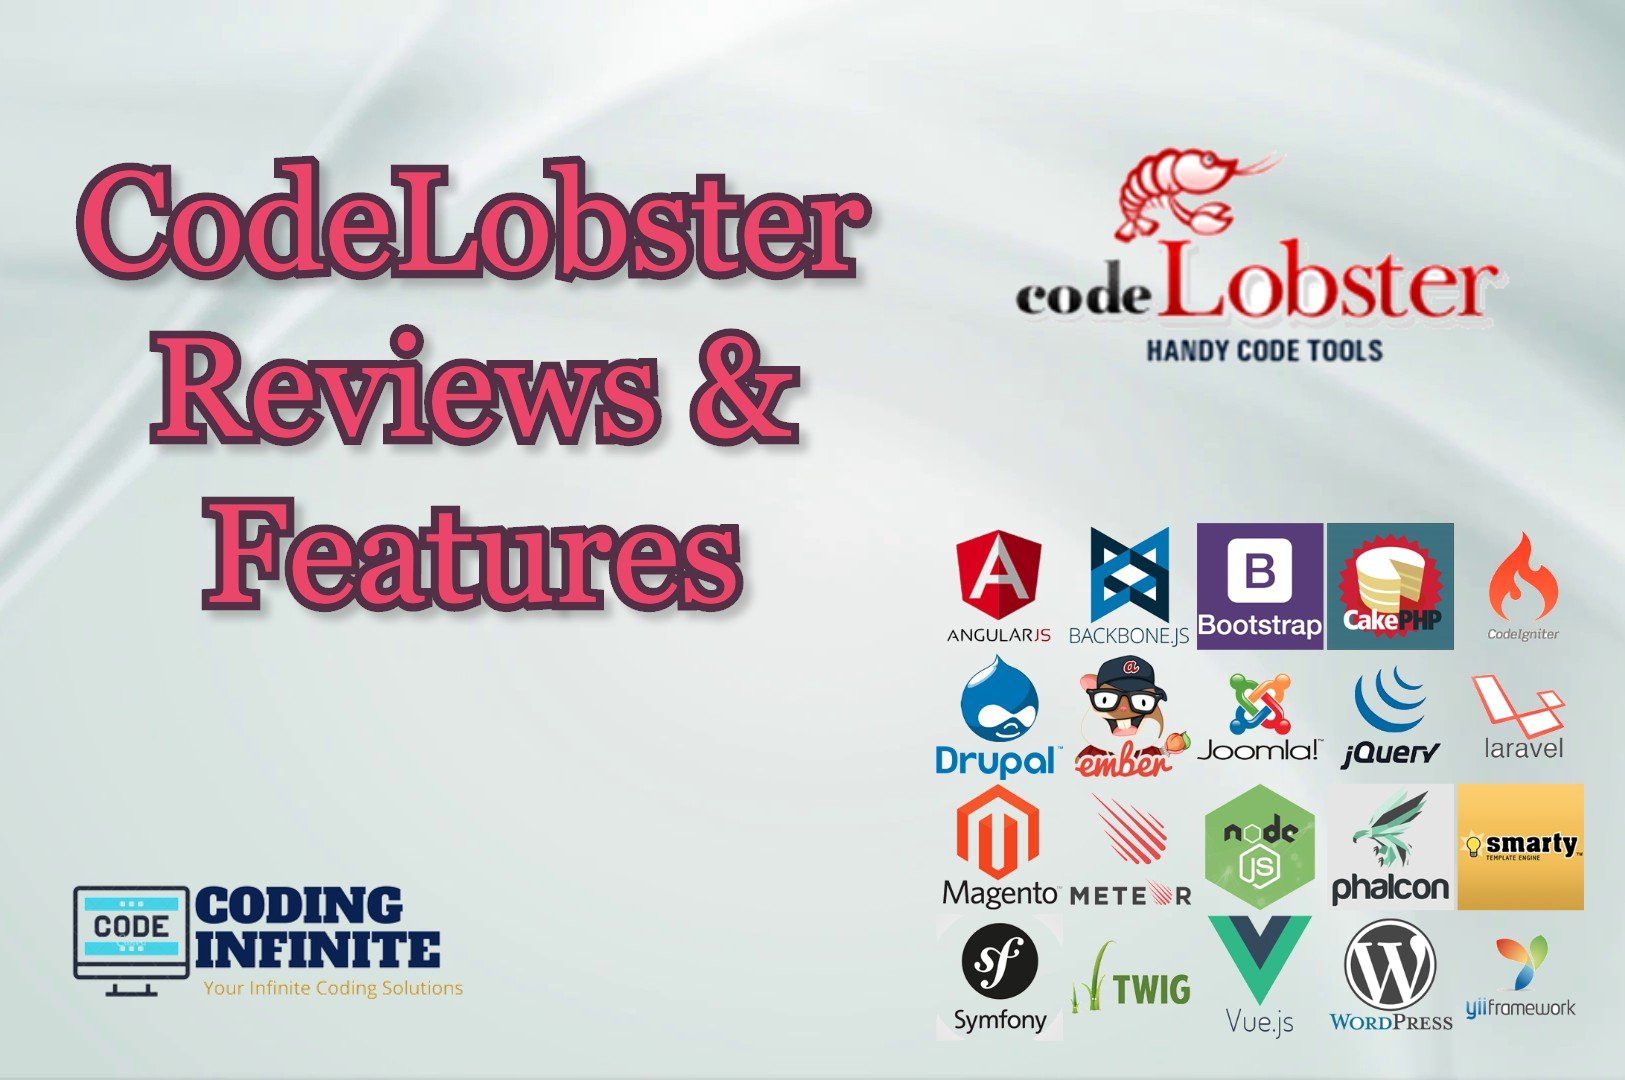 codelobster ide reviews & features